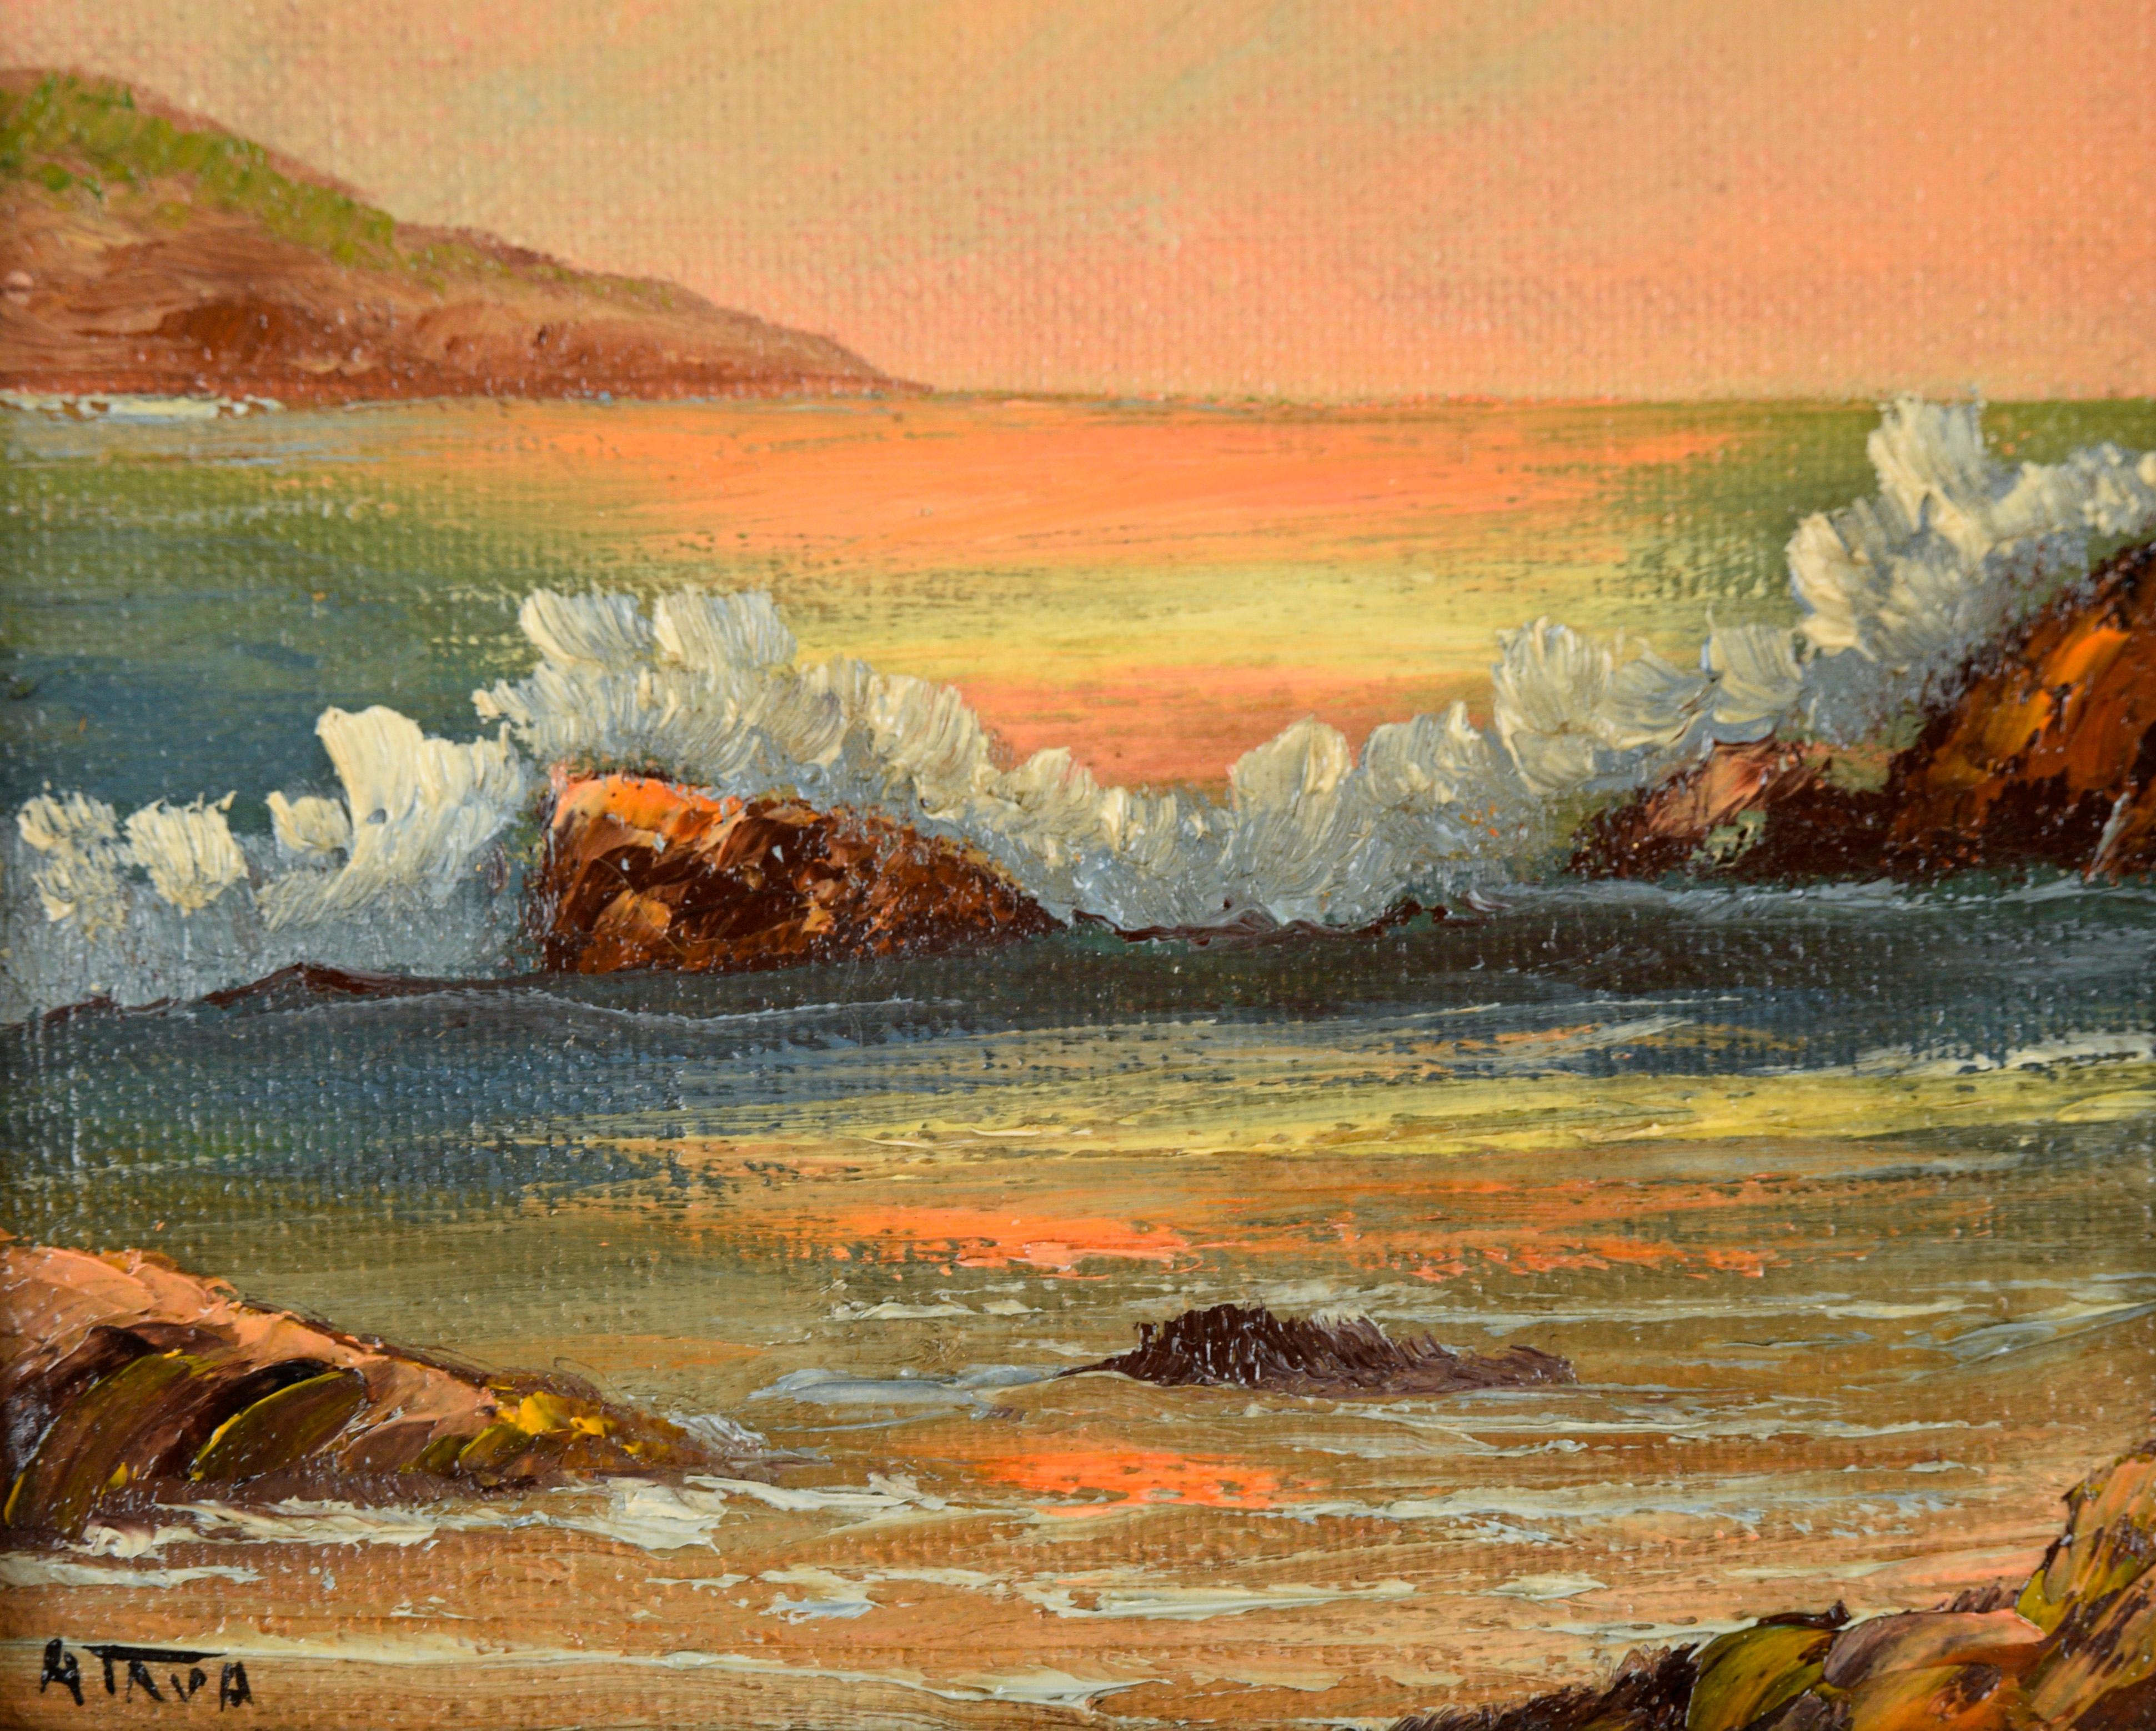 Sunset Seascape - Small Plein Air Oil Painting on Canvas 2